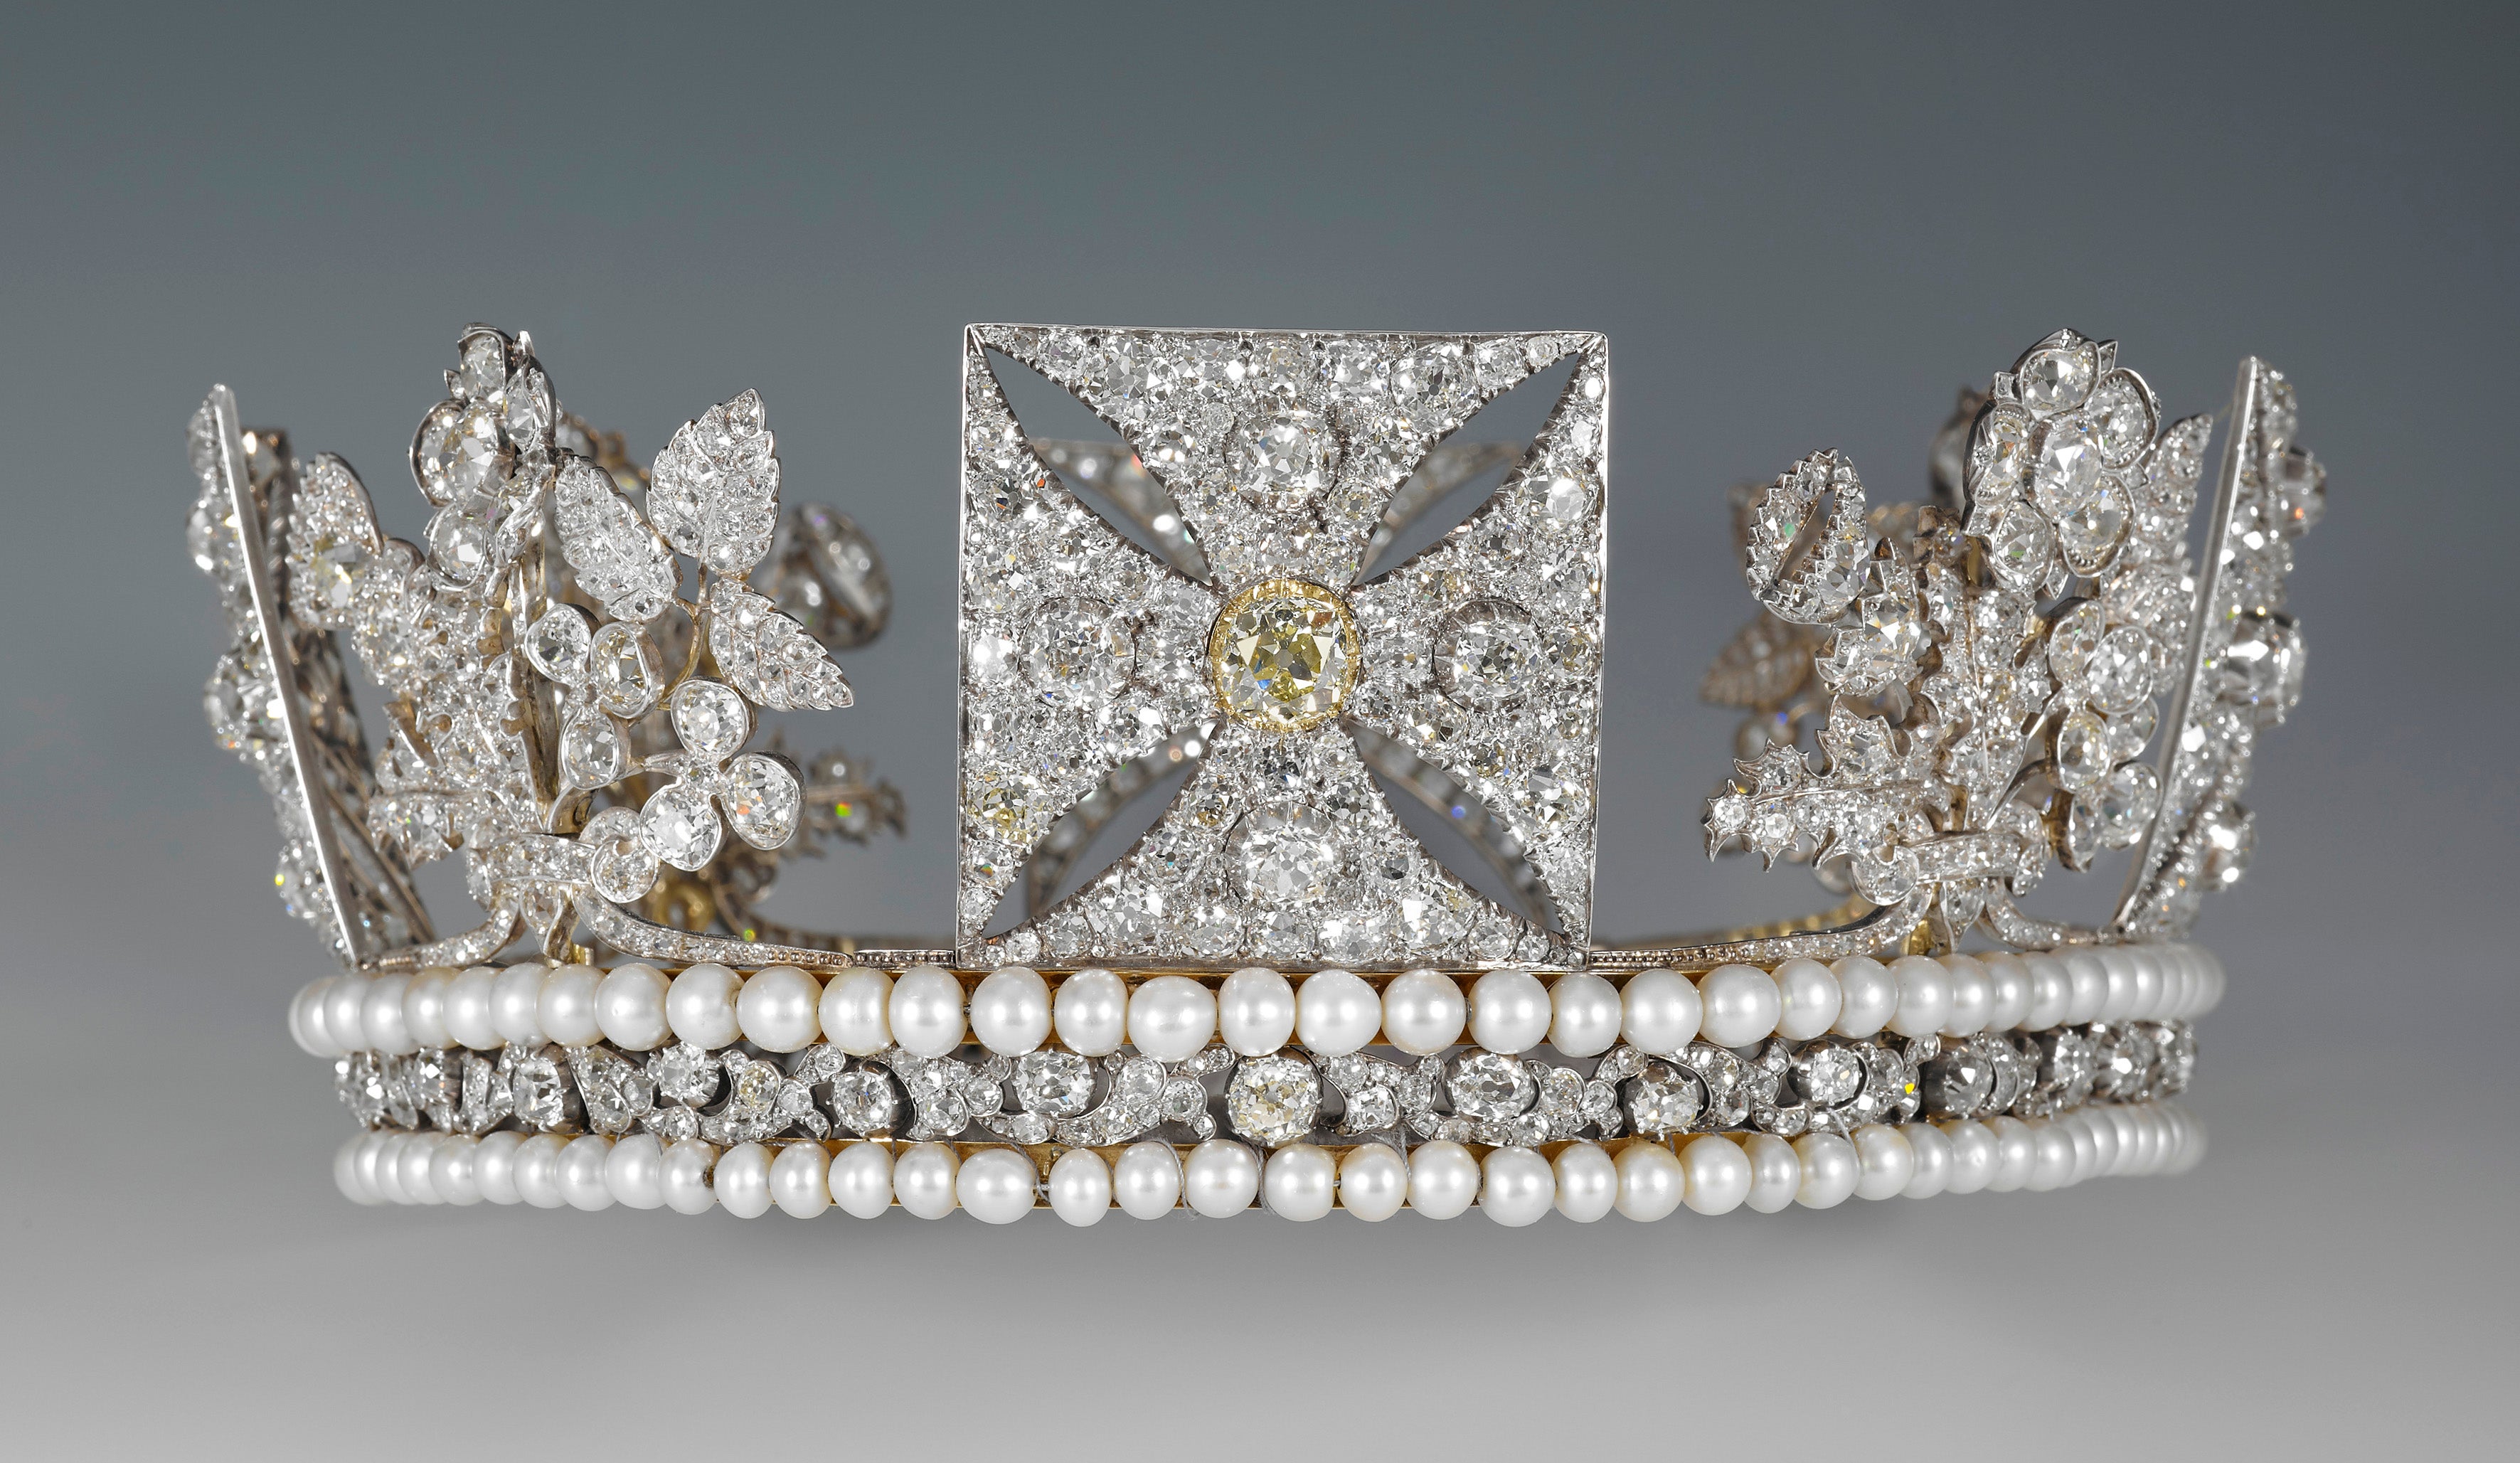 How Turquoise Replaced Emeralds in This Royal Diadem